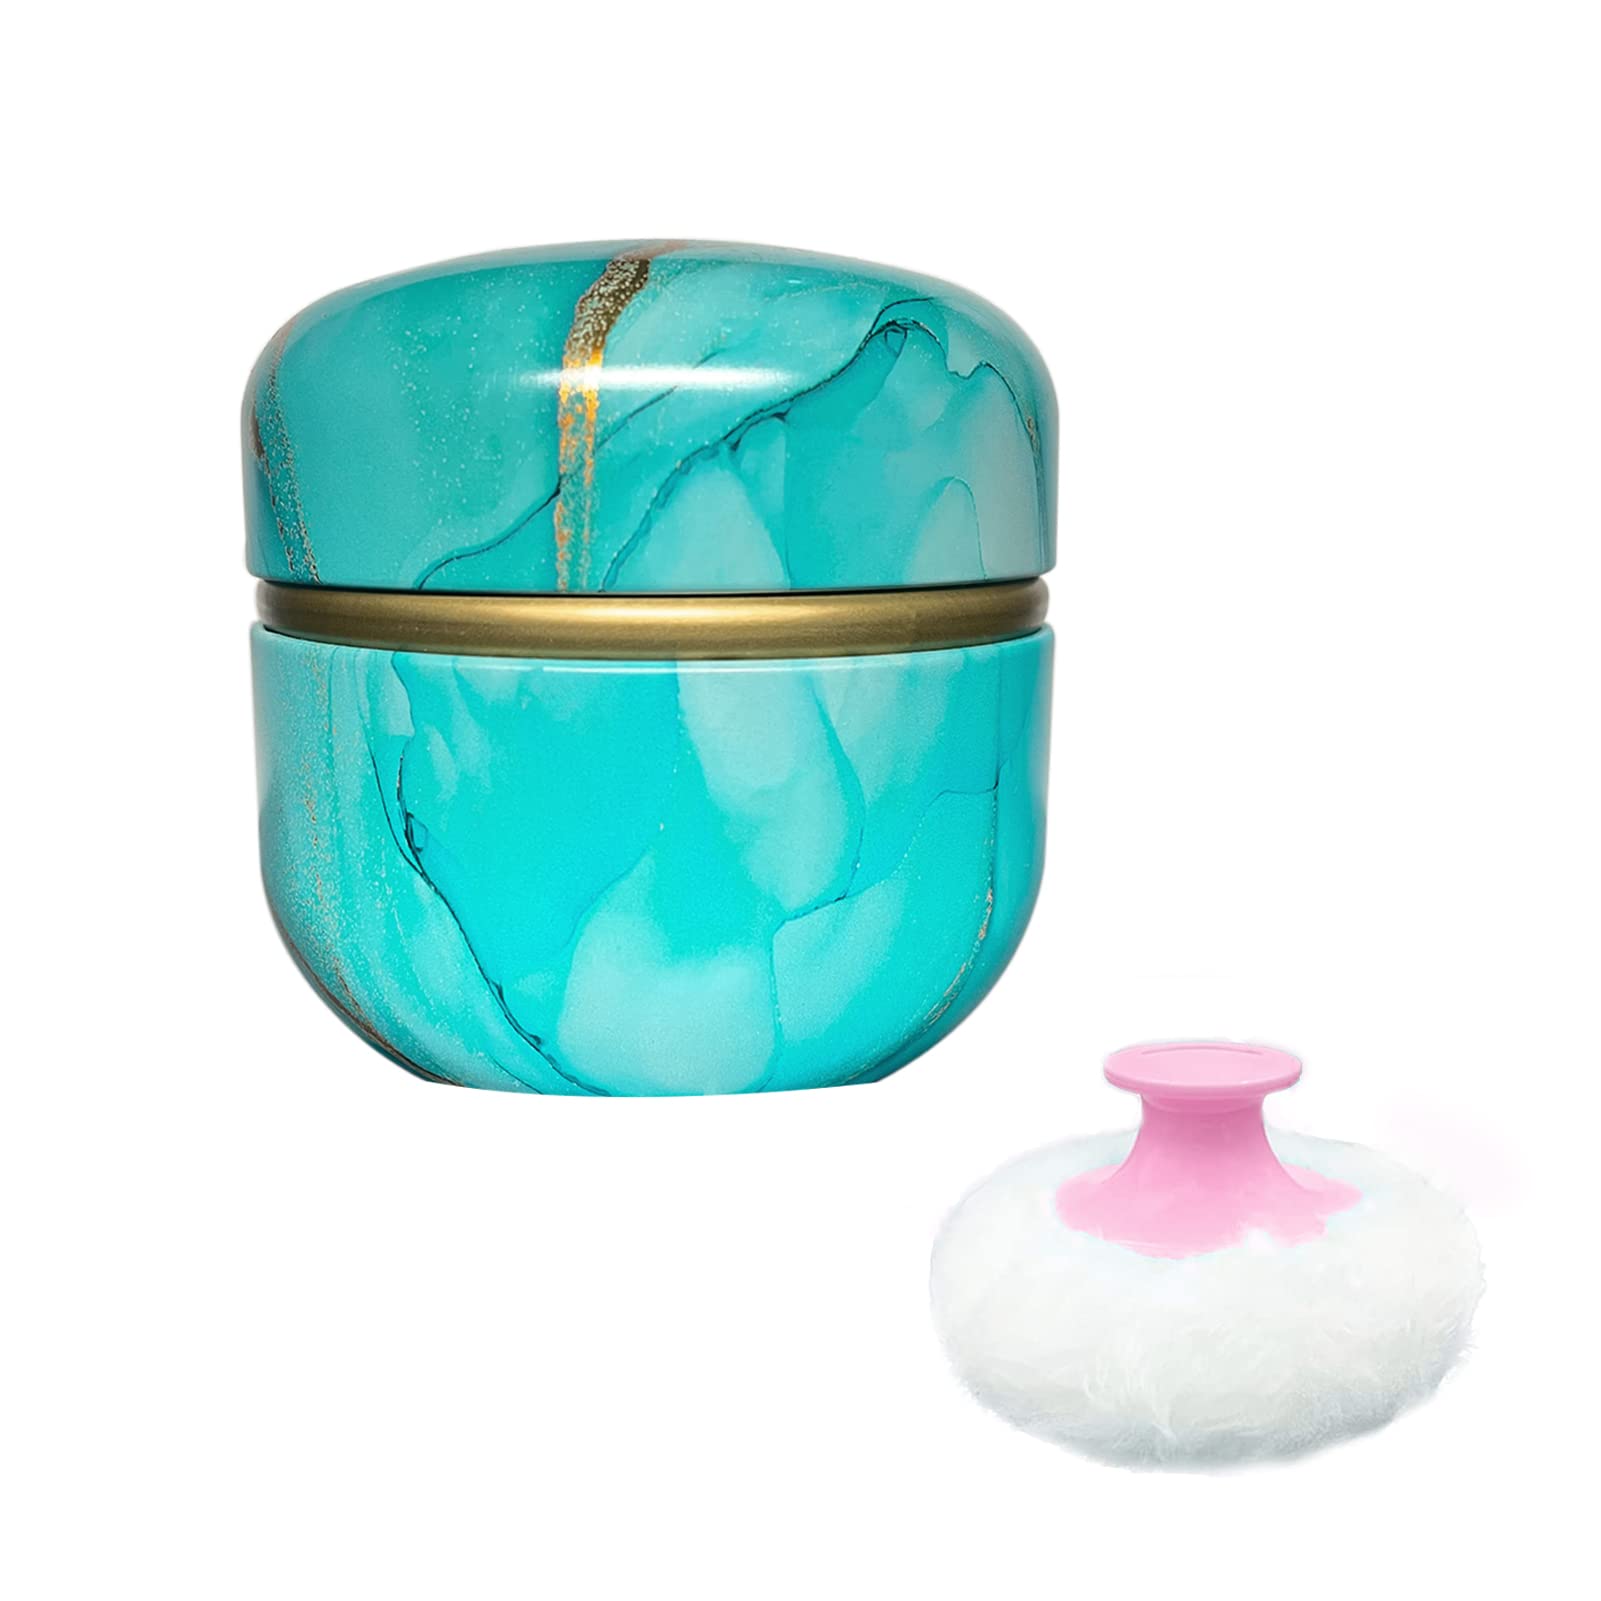 Mogugu - Loose Powder Travel Container with Puff